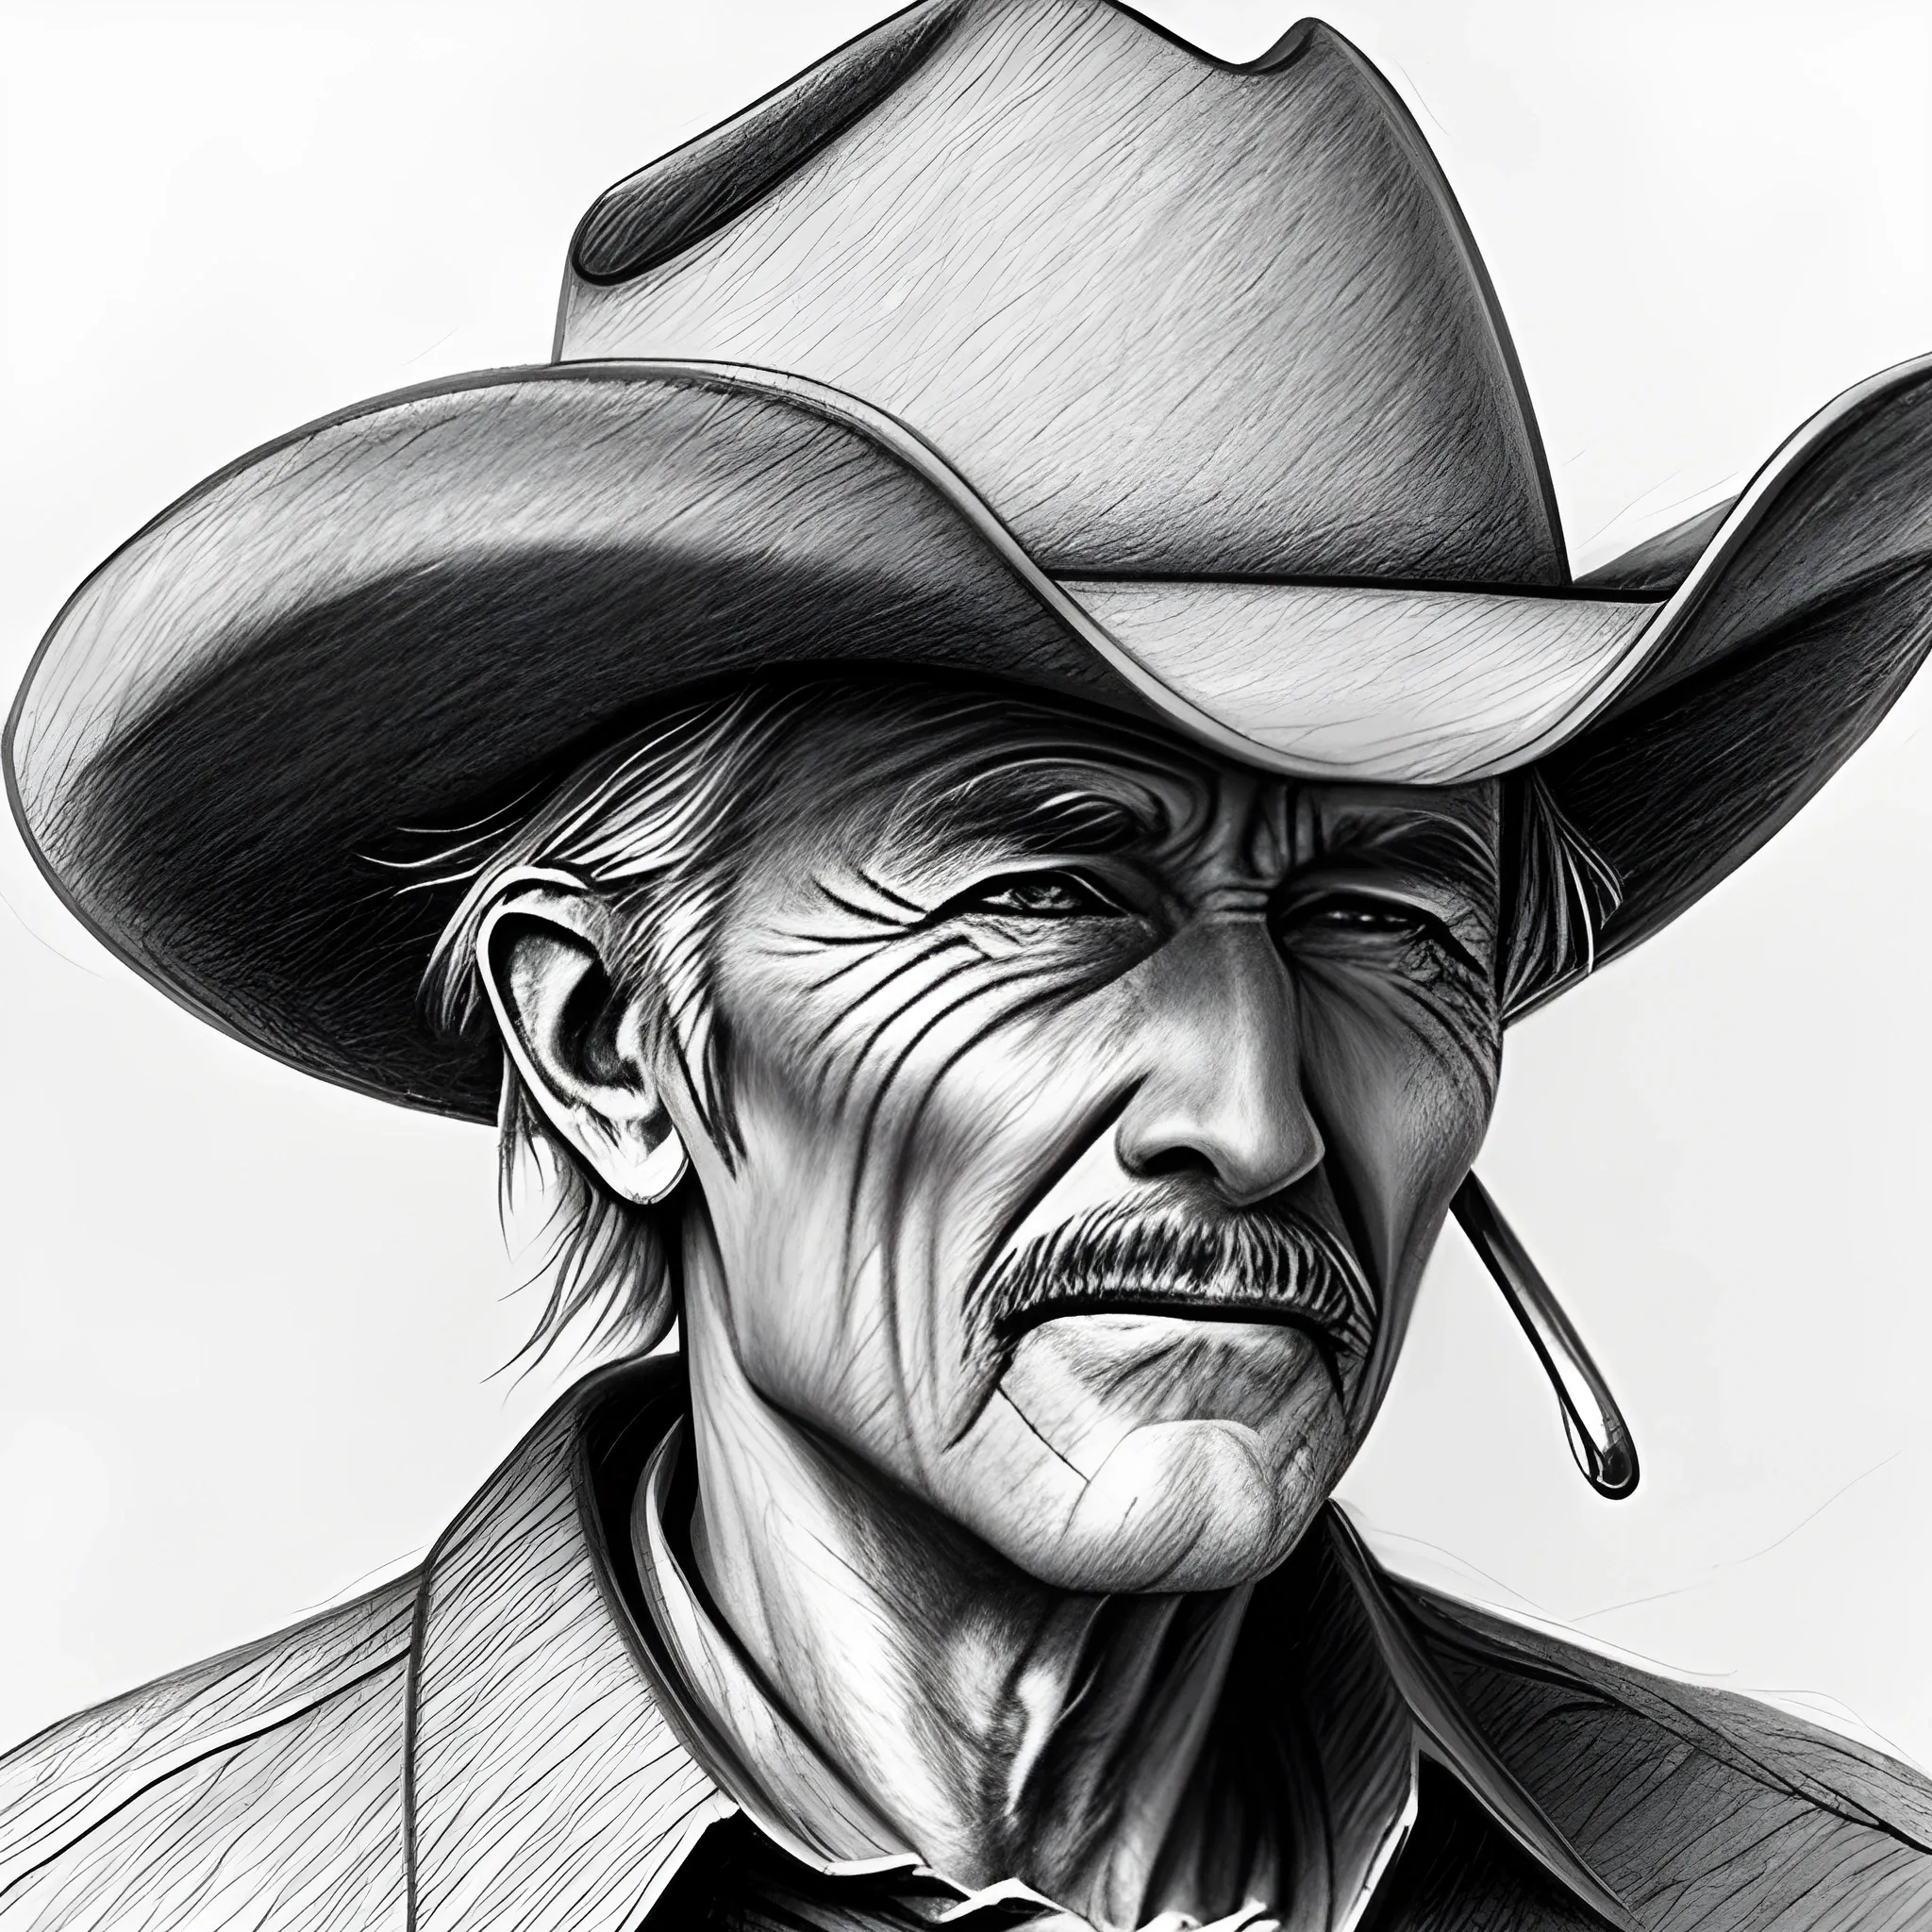 Cowboy Hat Drawing - How To Draw A Cowboy Hat Step By Step